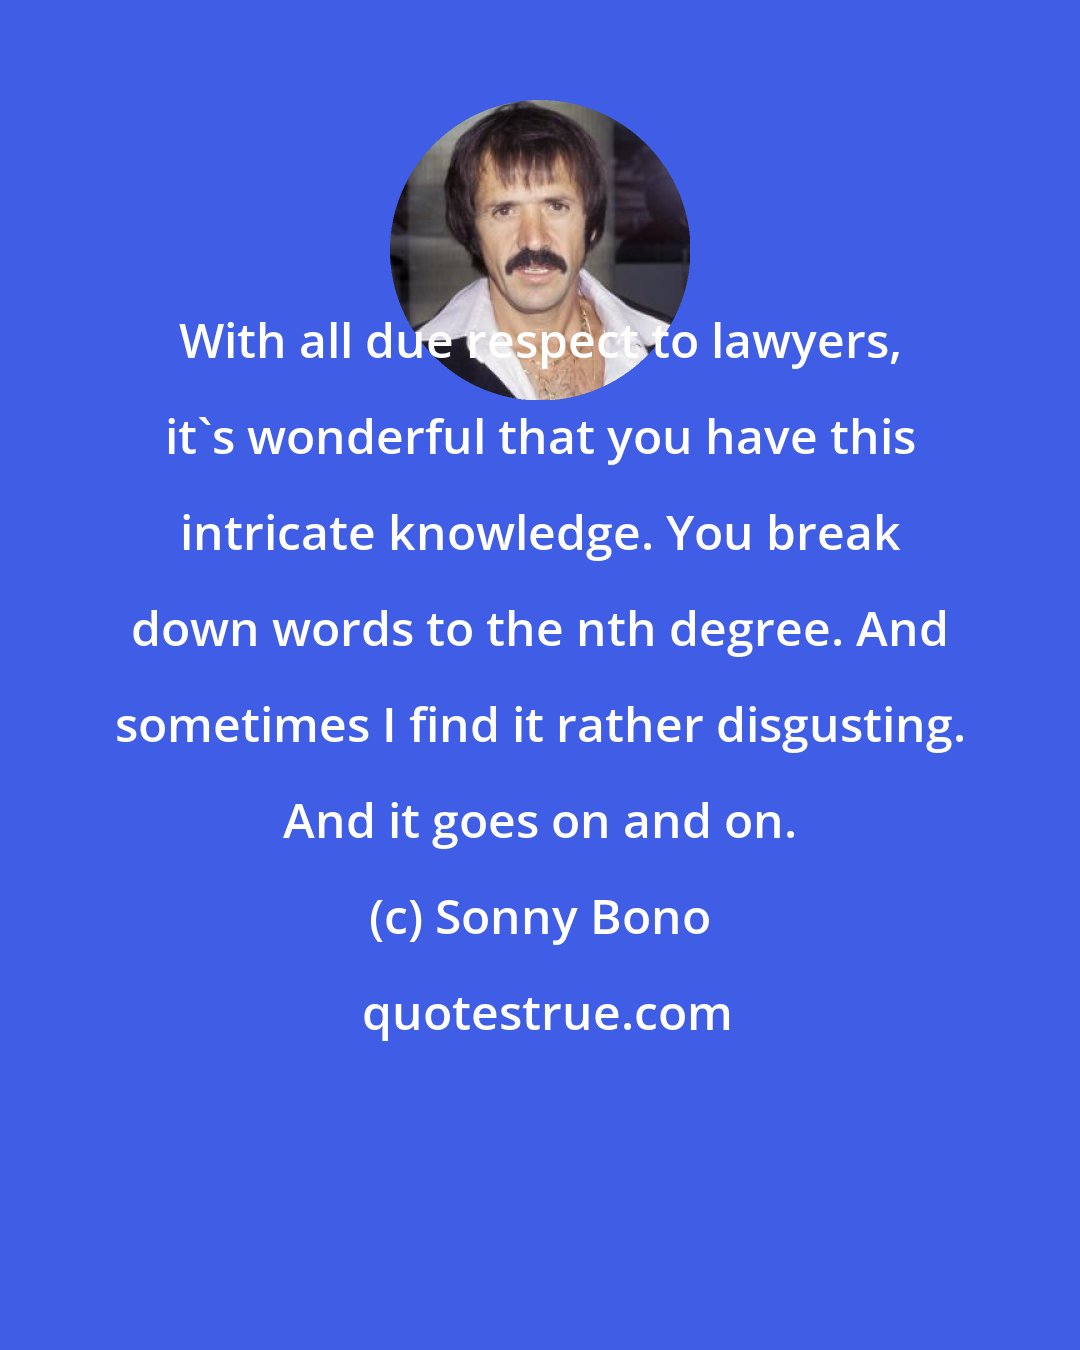 Sonny Bono: With all due respect to lawyers, it's wonderful that you have this intricate knowledge. You break down words to the nth degree. And sometimes I find it rather disgusting. And it goes on and on.